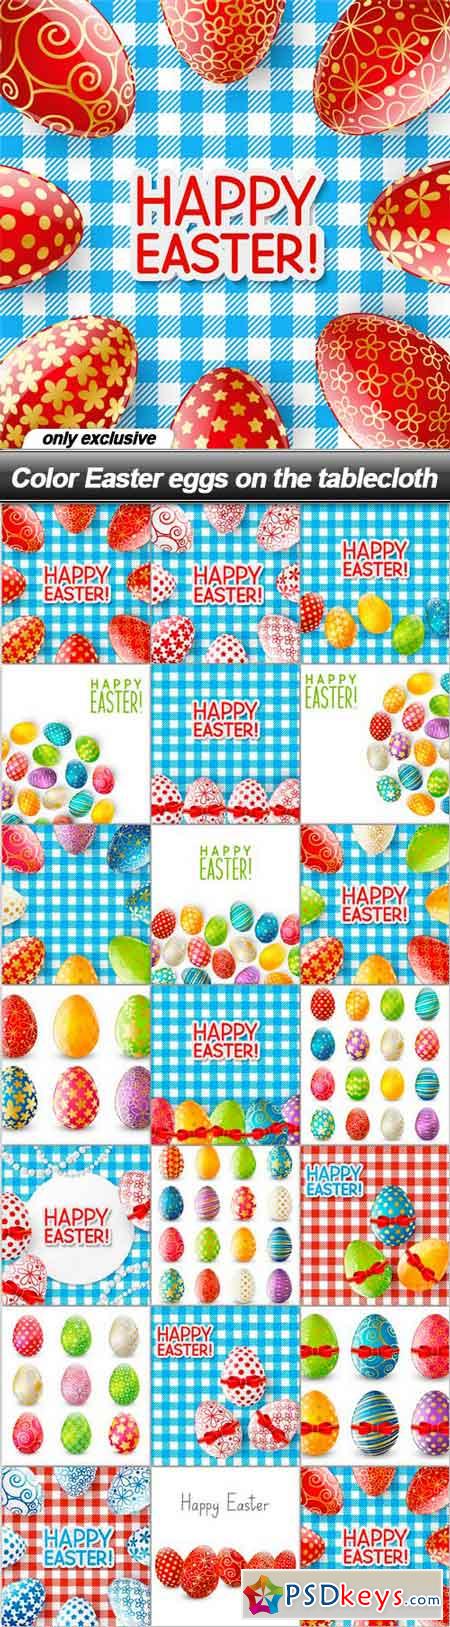 Color Easter eggs on the tablecloth - 20 EPS